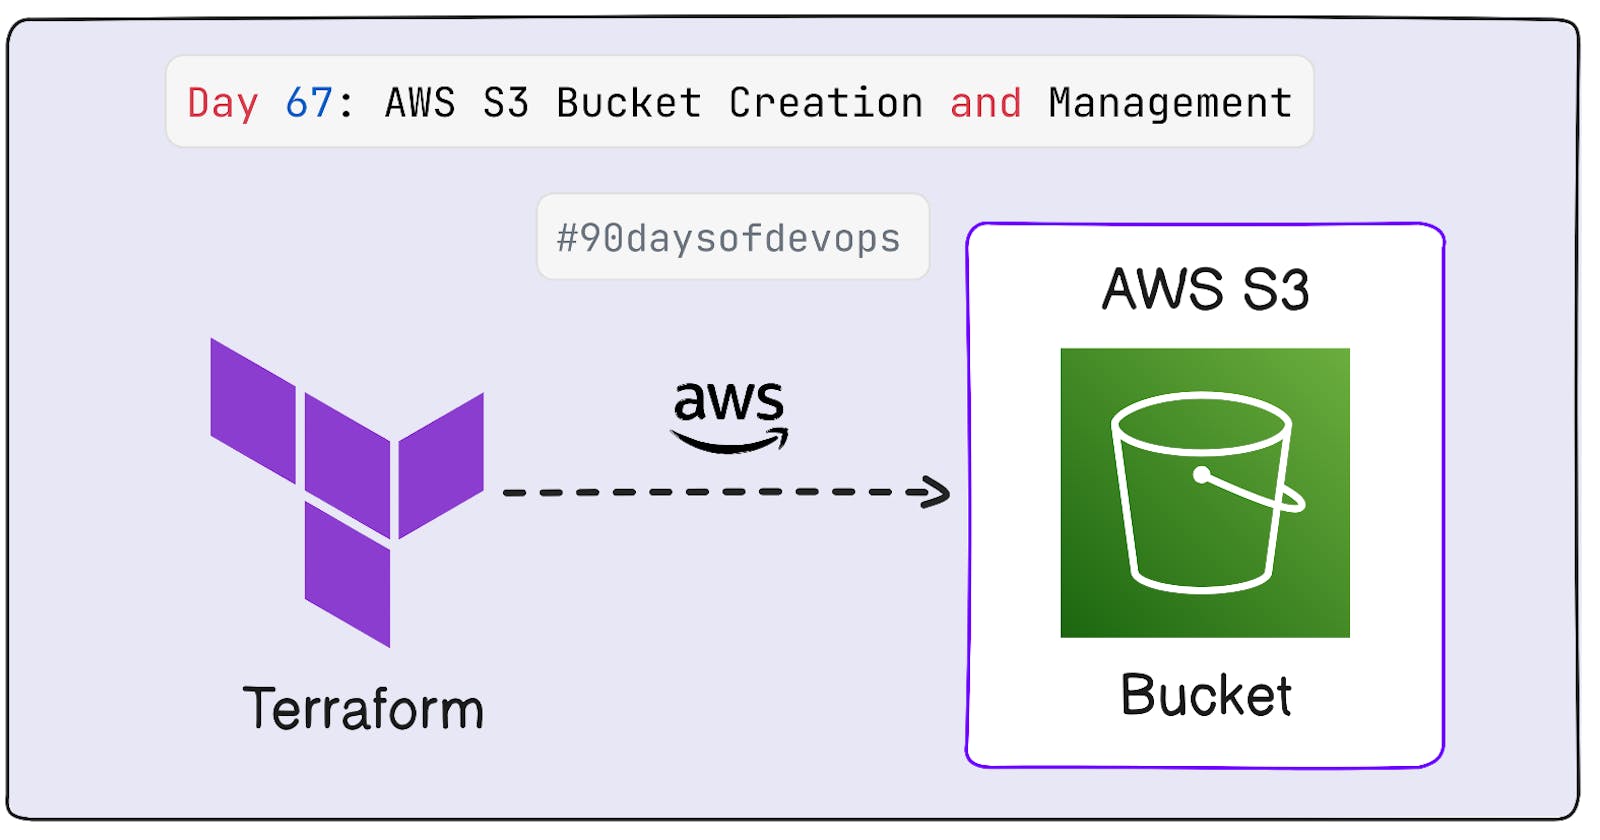 Day 67: AWS S3 Bucket Creation and Management